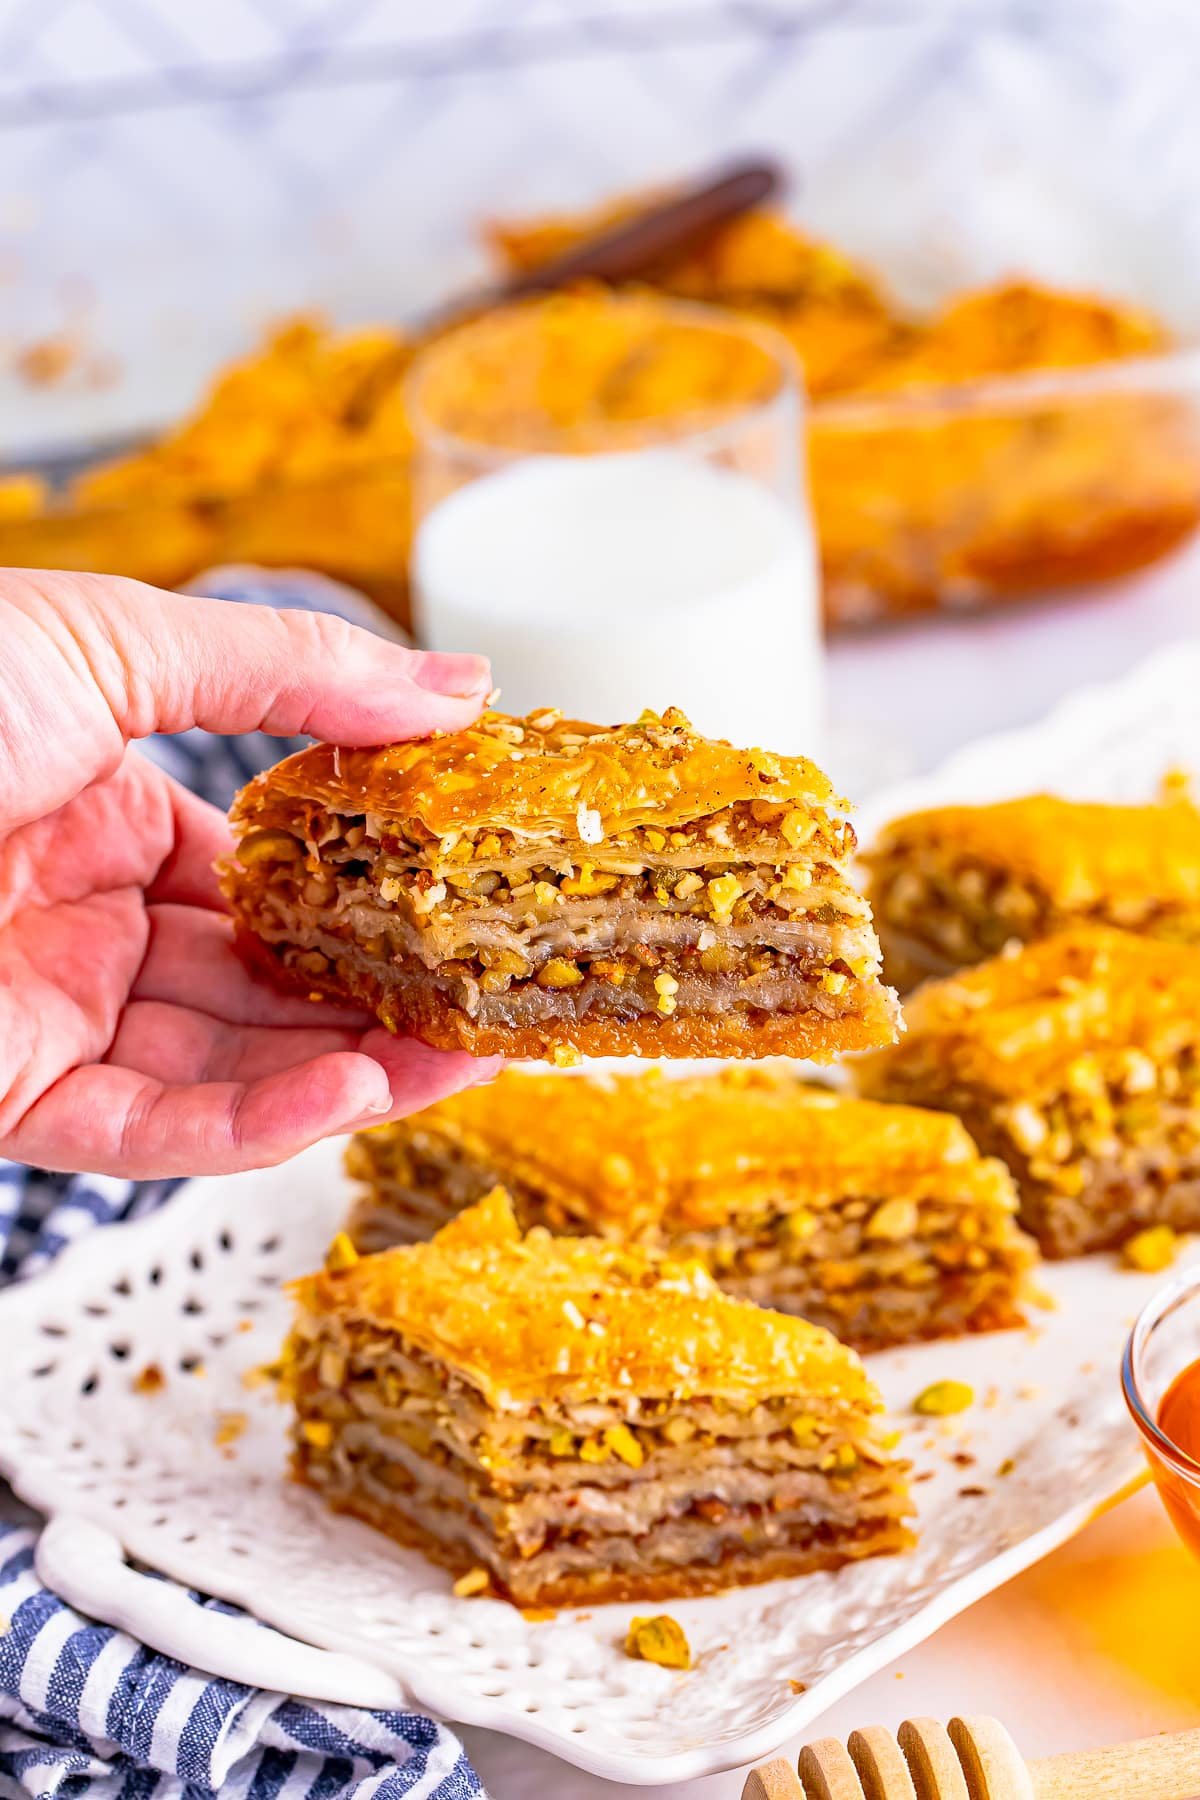 Slice of Easy Baklava Recipe being held up by a hand.